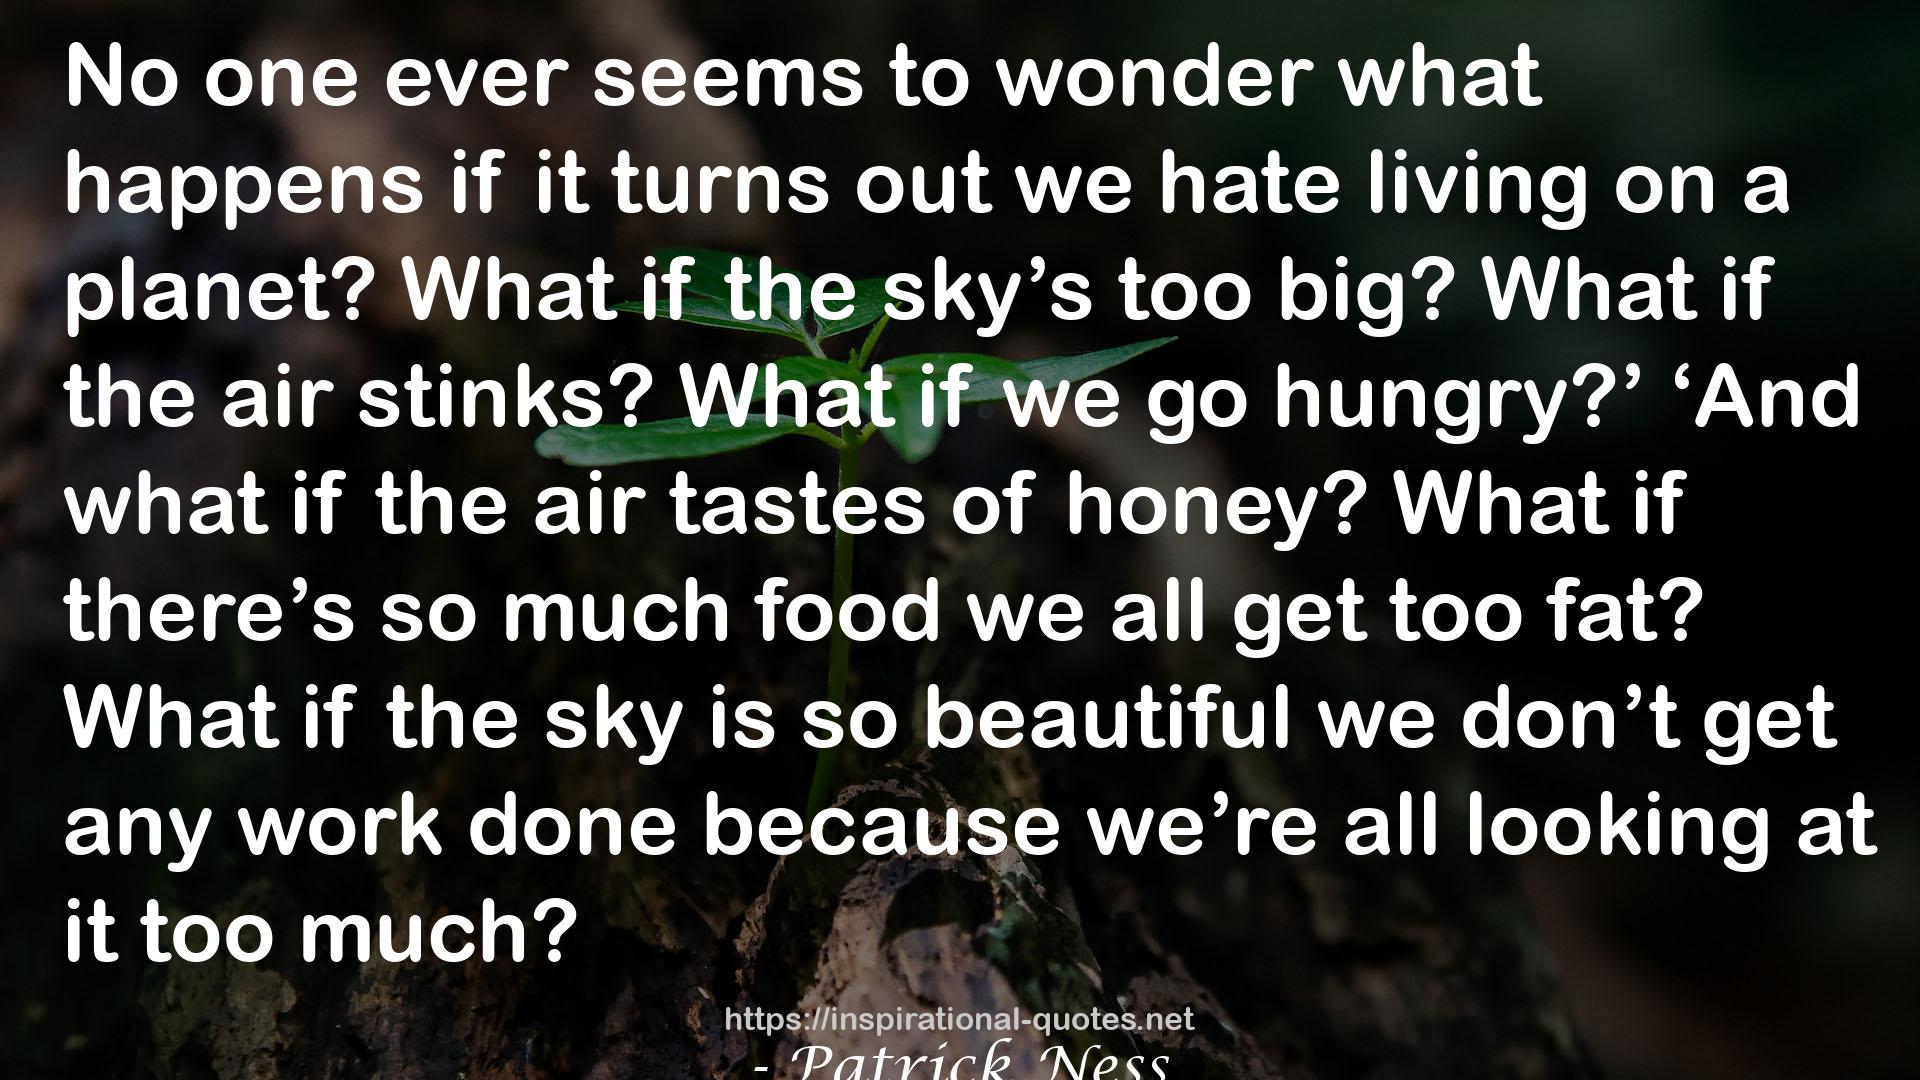 The New World (Chaos Walking, #0.5) QUOTES